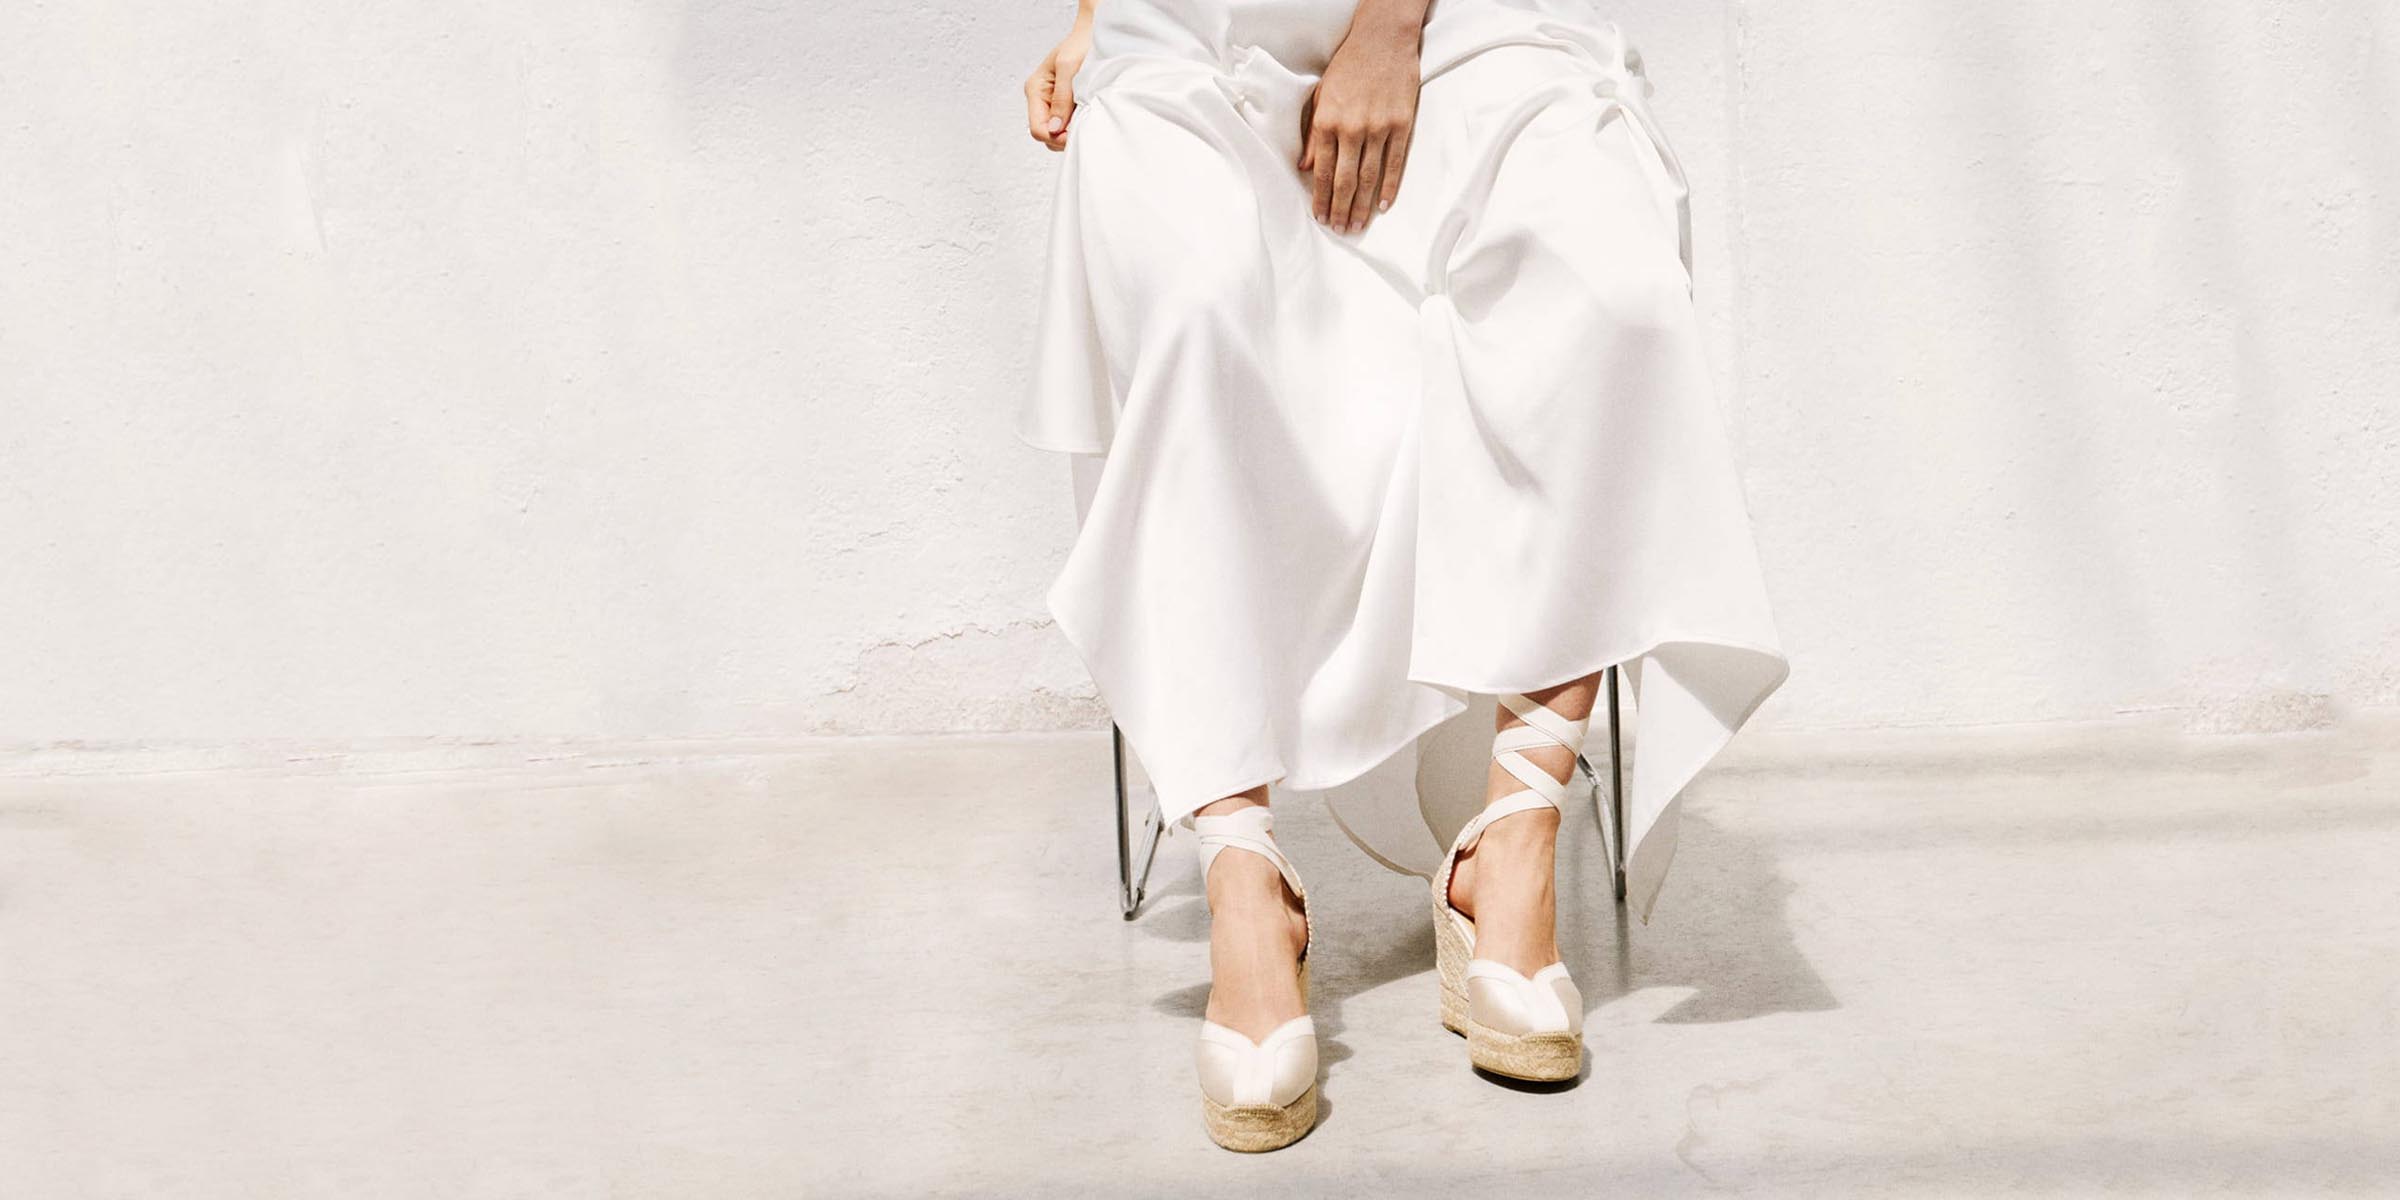 LEATHER ESPADRILLES SANDALS in White. Summer Flat Shoes. 